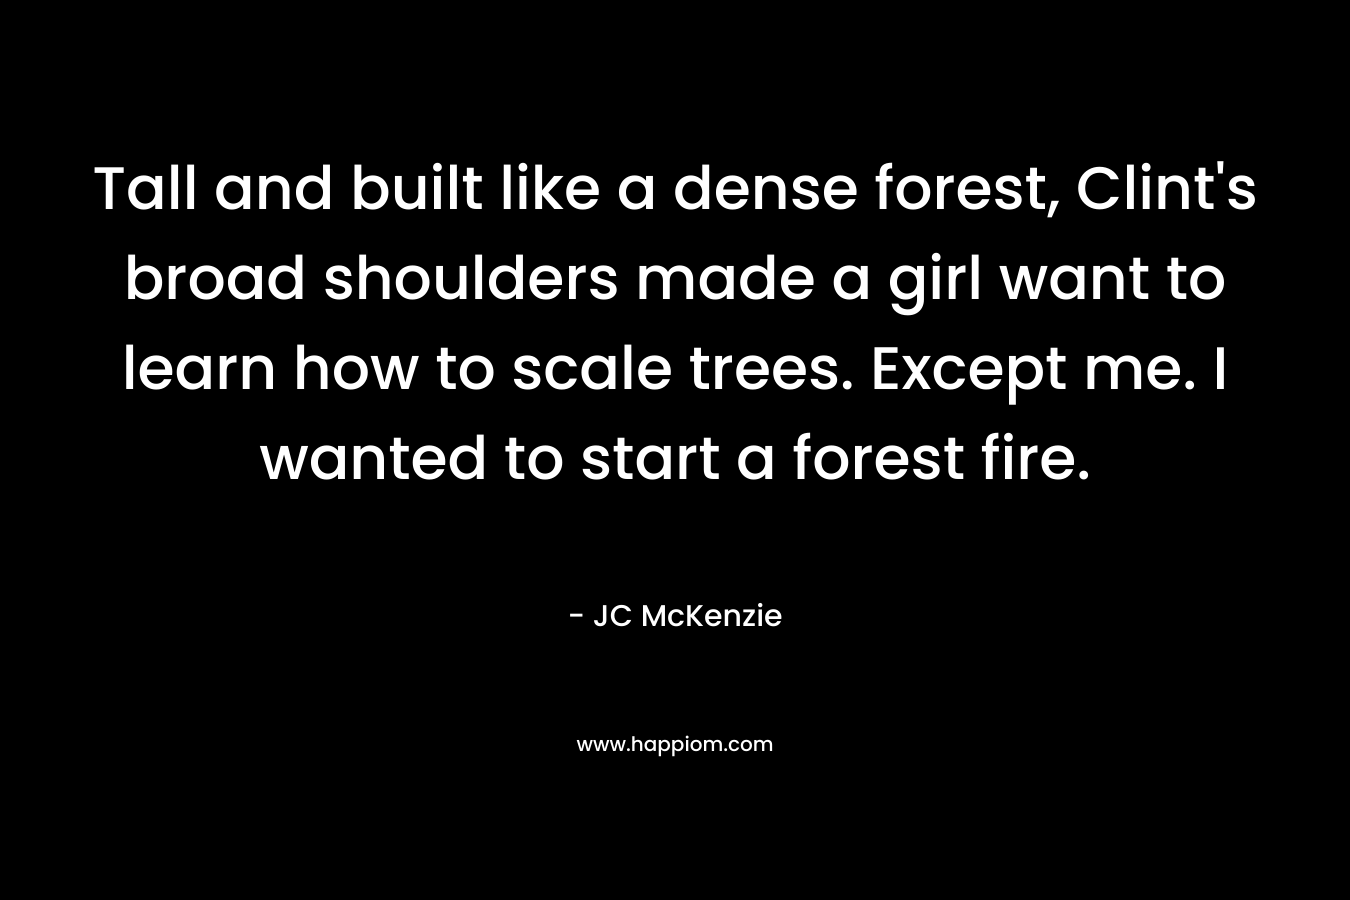 Tall and built like a dense forest, Clint's broad shoulders made a girl want to learn how to scale trees. Except me. I wanted to start a forest fire.